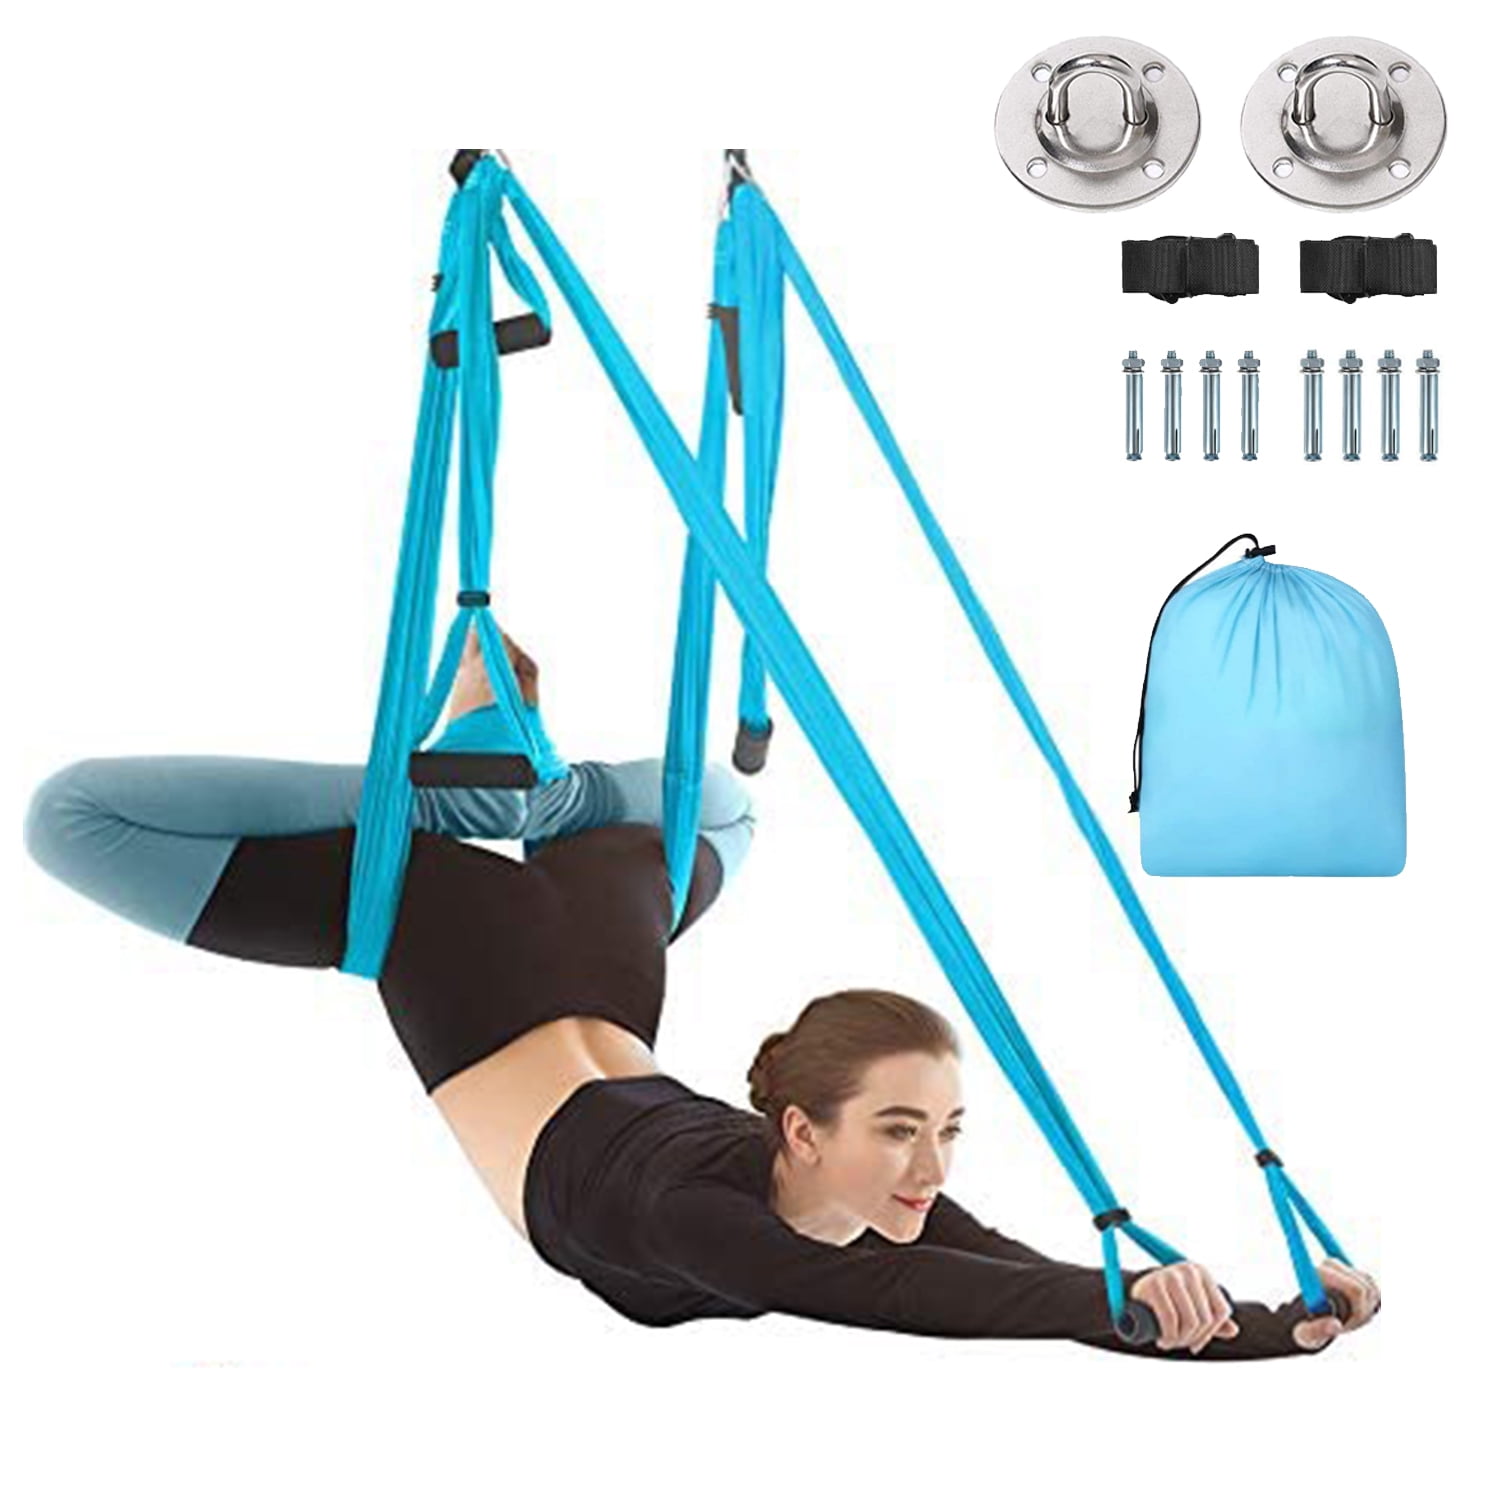 Extension Straps Aerial Silks Home Gym Fitness Inversion Exercise Equipment Manual Antigravity Flying Yoga Sling Swing Sets Warrior2 Aerial Yoga Swing Trapeze Hammock With Mounting Kit Hardware